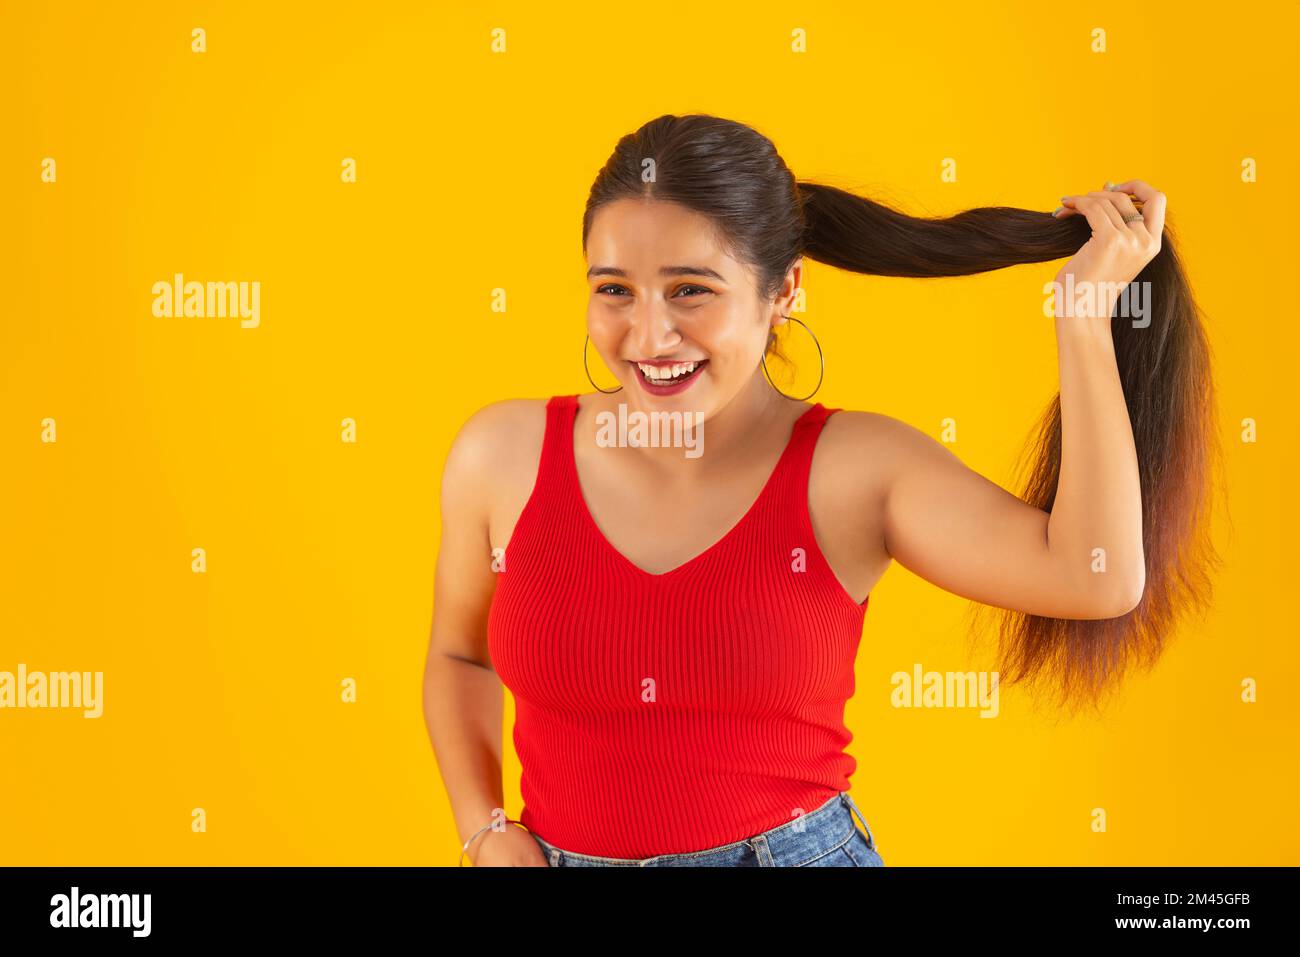 Smiling teenage girl holding her hair against yellow background Stock Photo